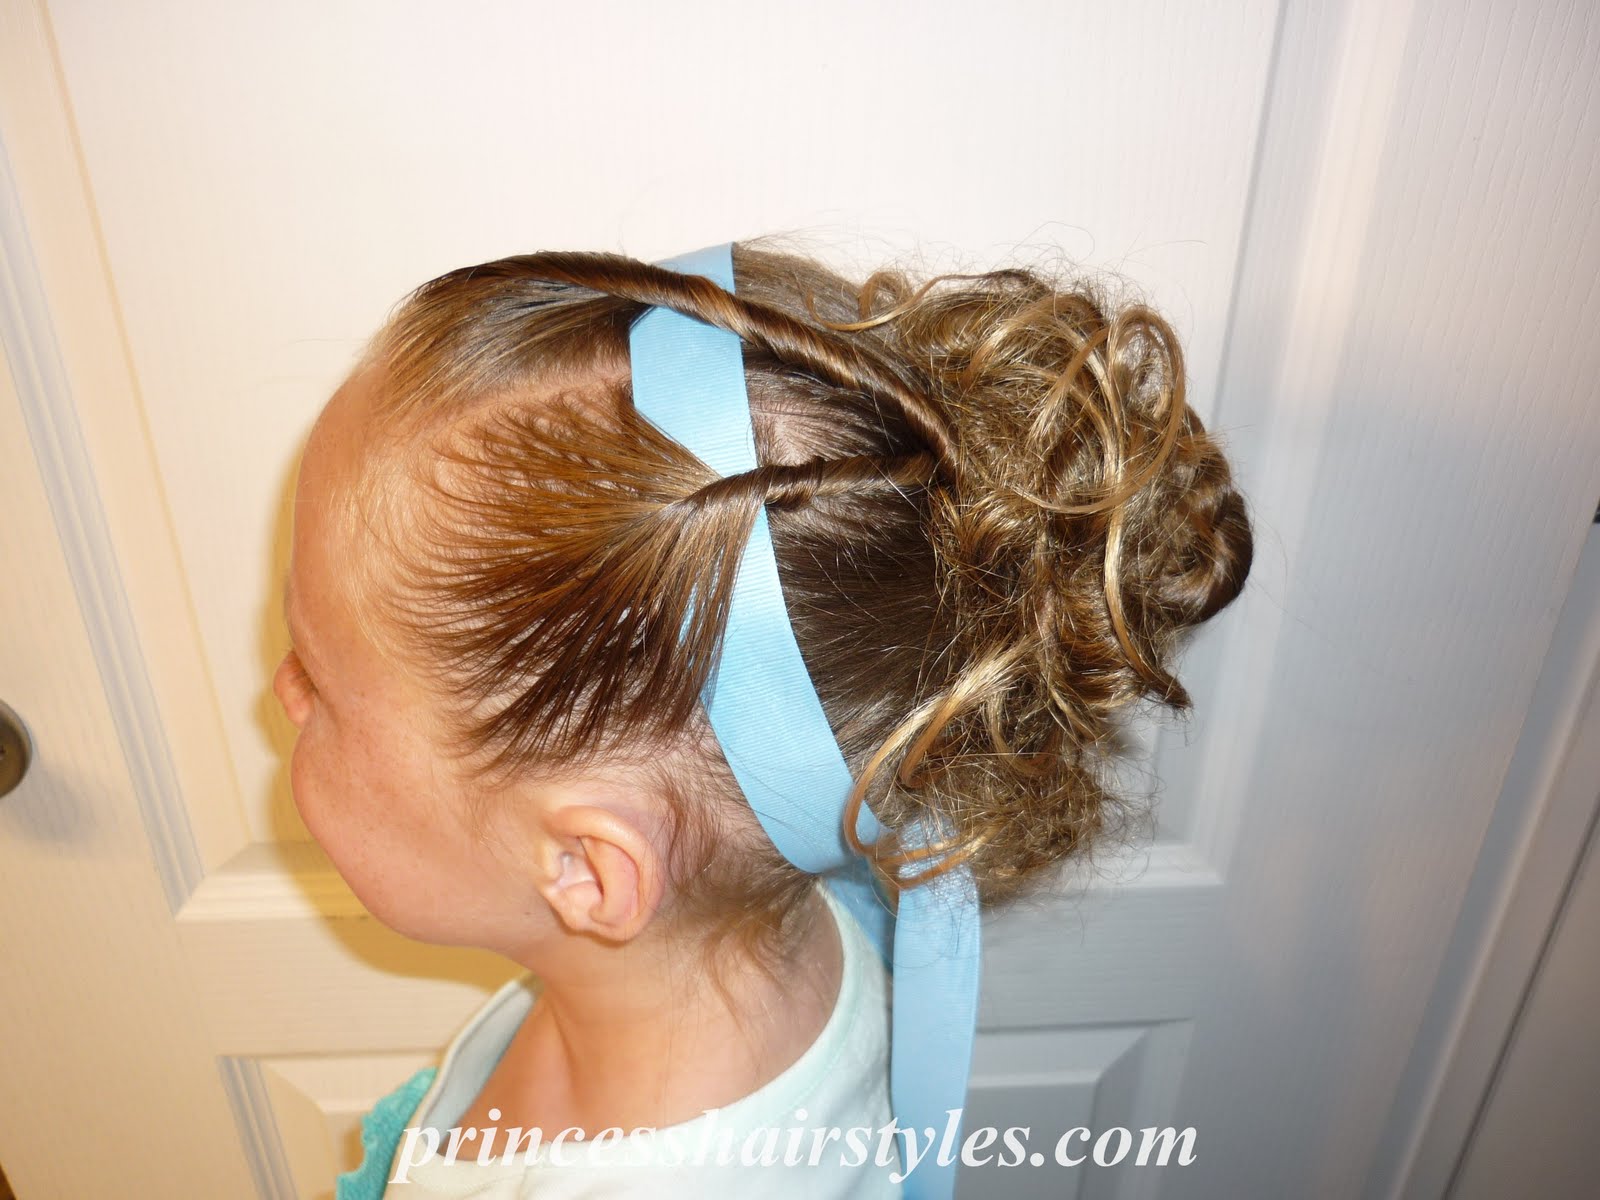 Hairstyles For Girls: Hairstyles for Dance Competition 